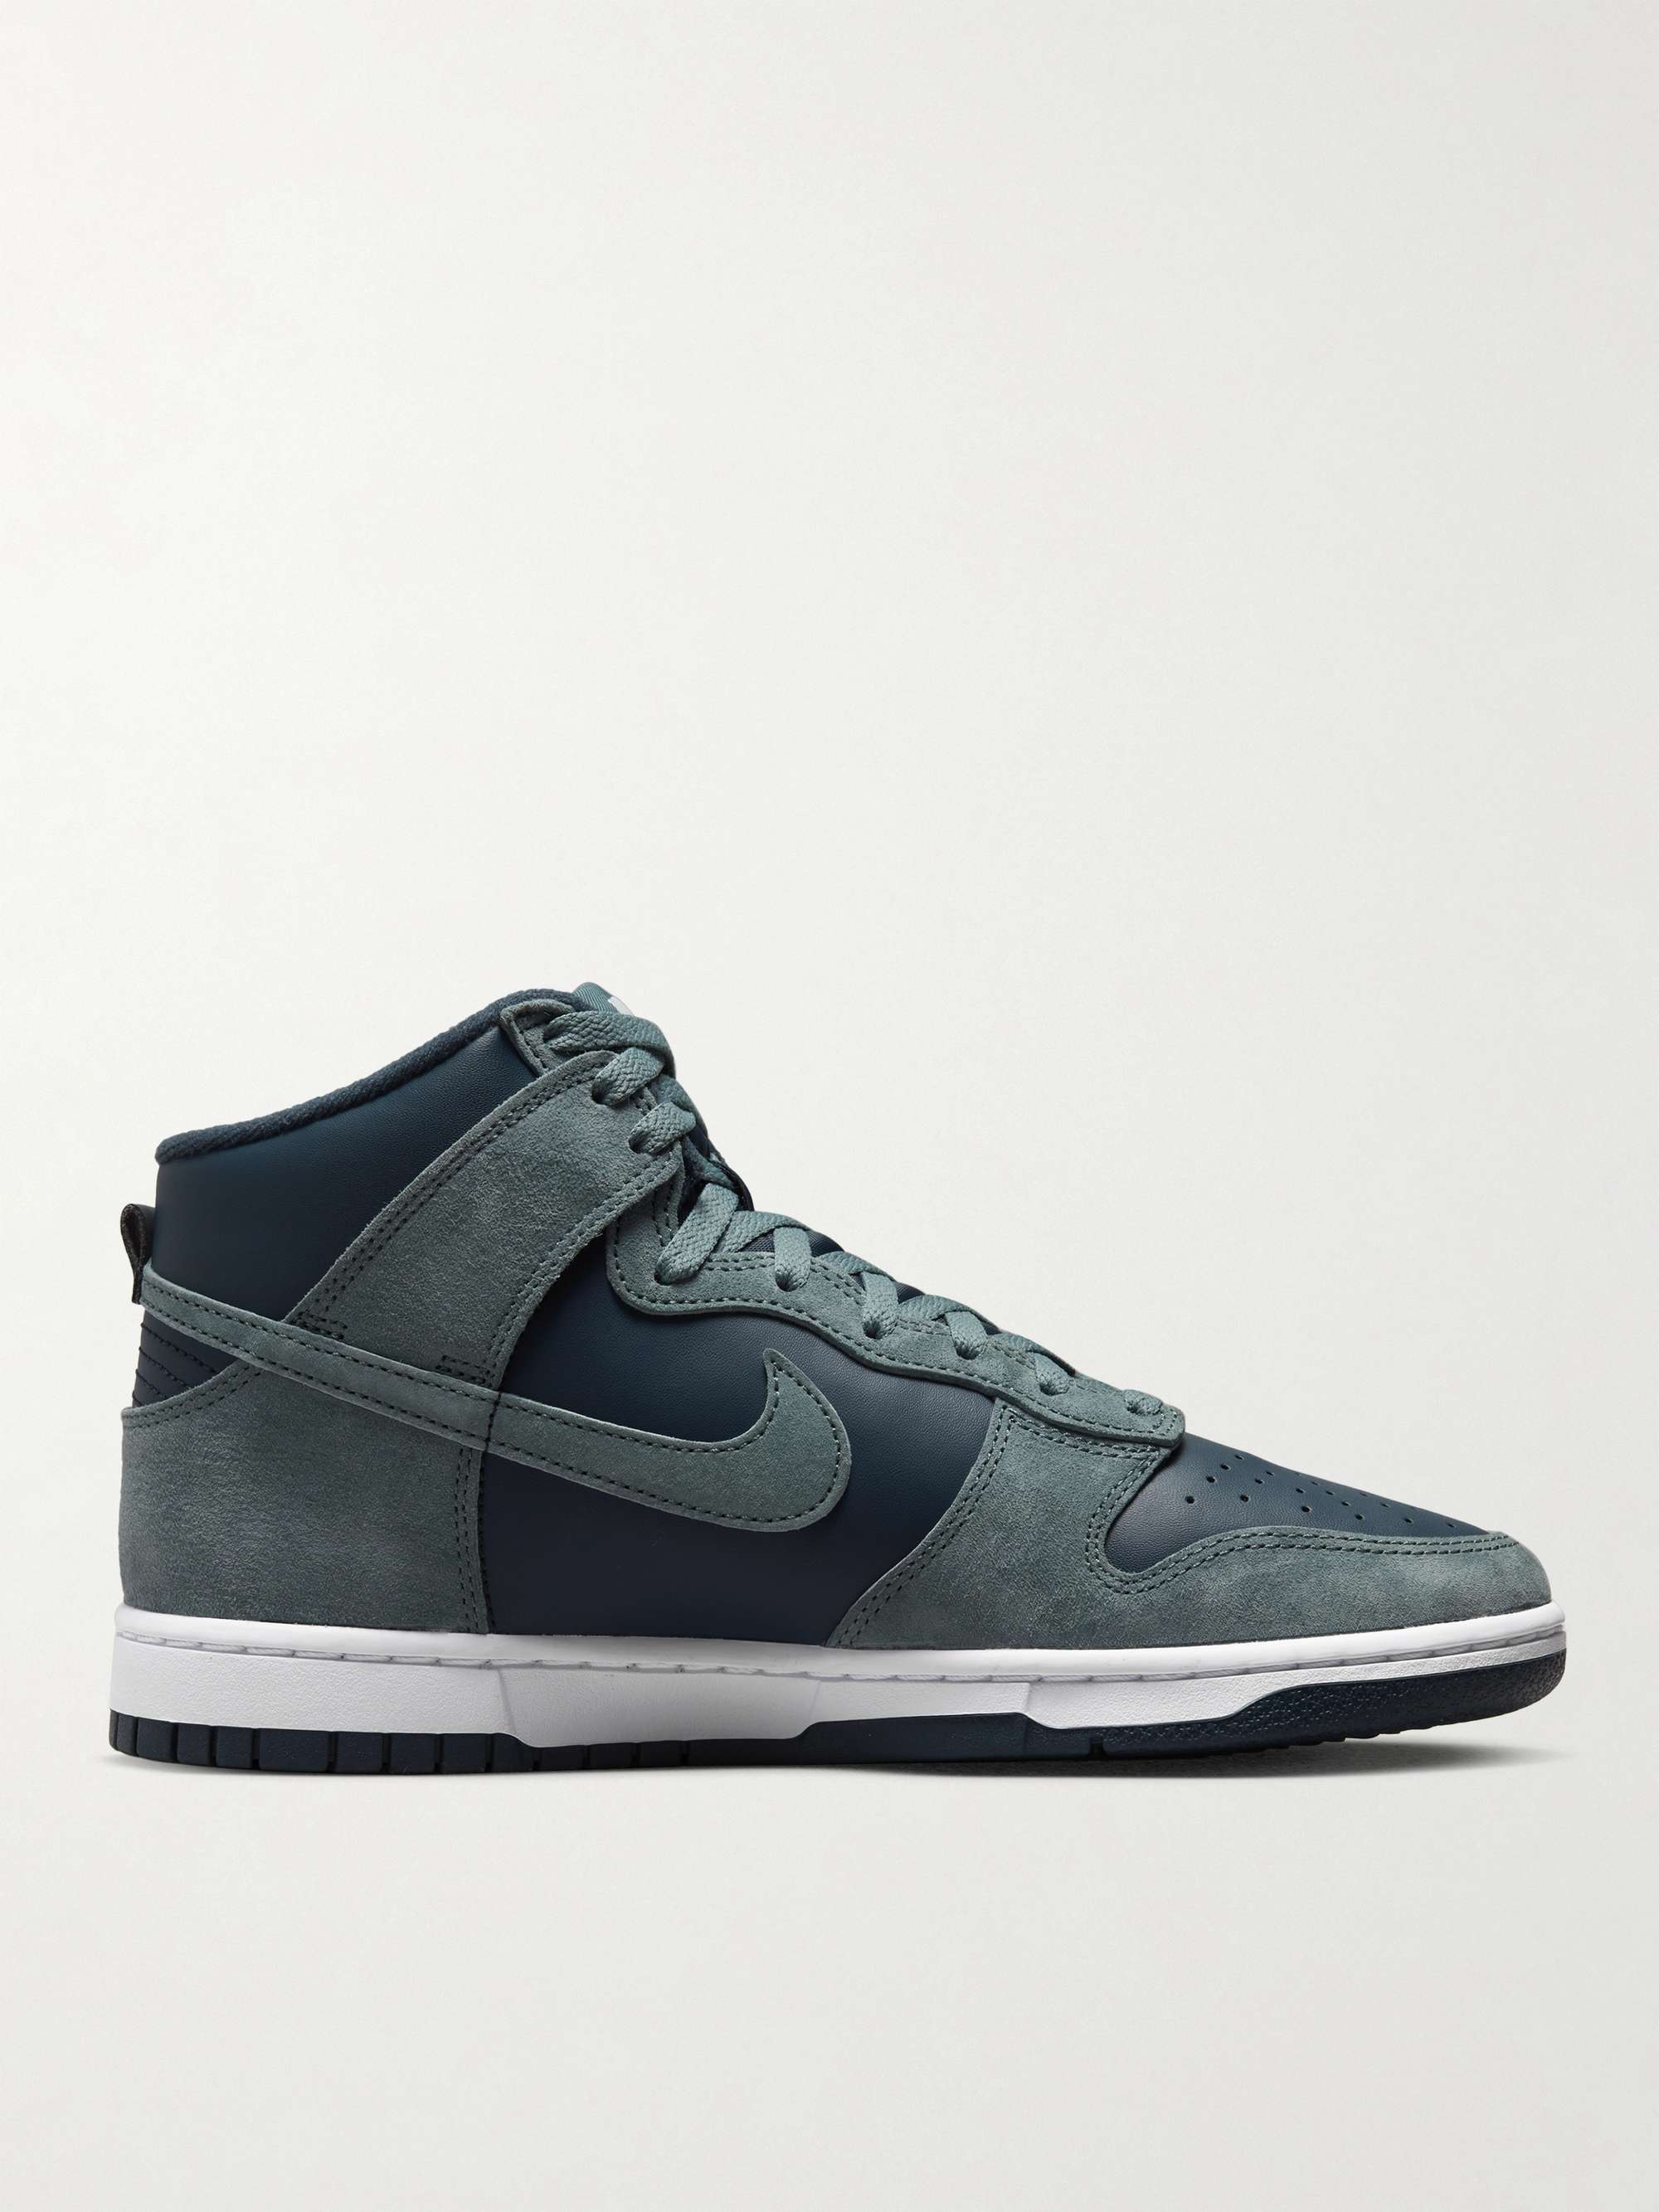 NIKE Dunk High Leather Sneakers | MR PORTER